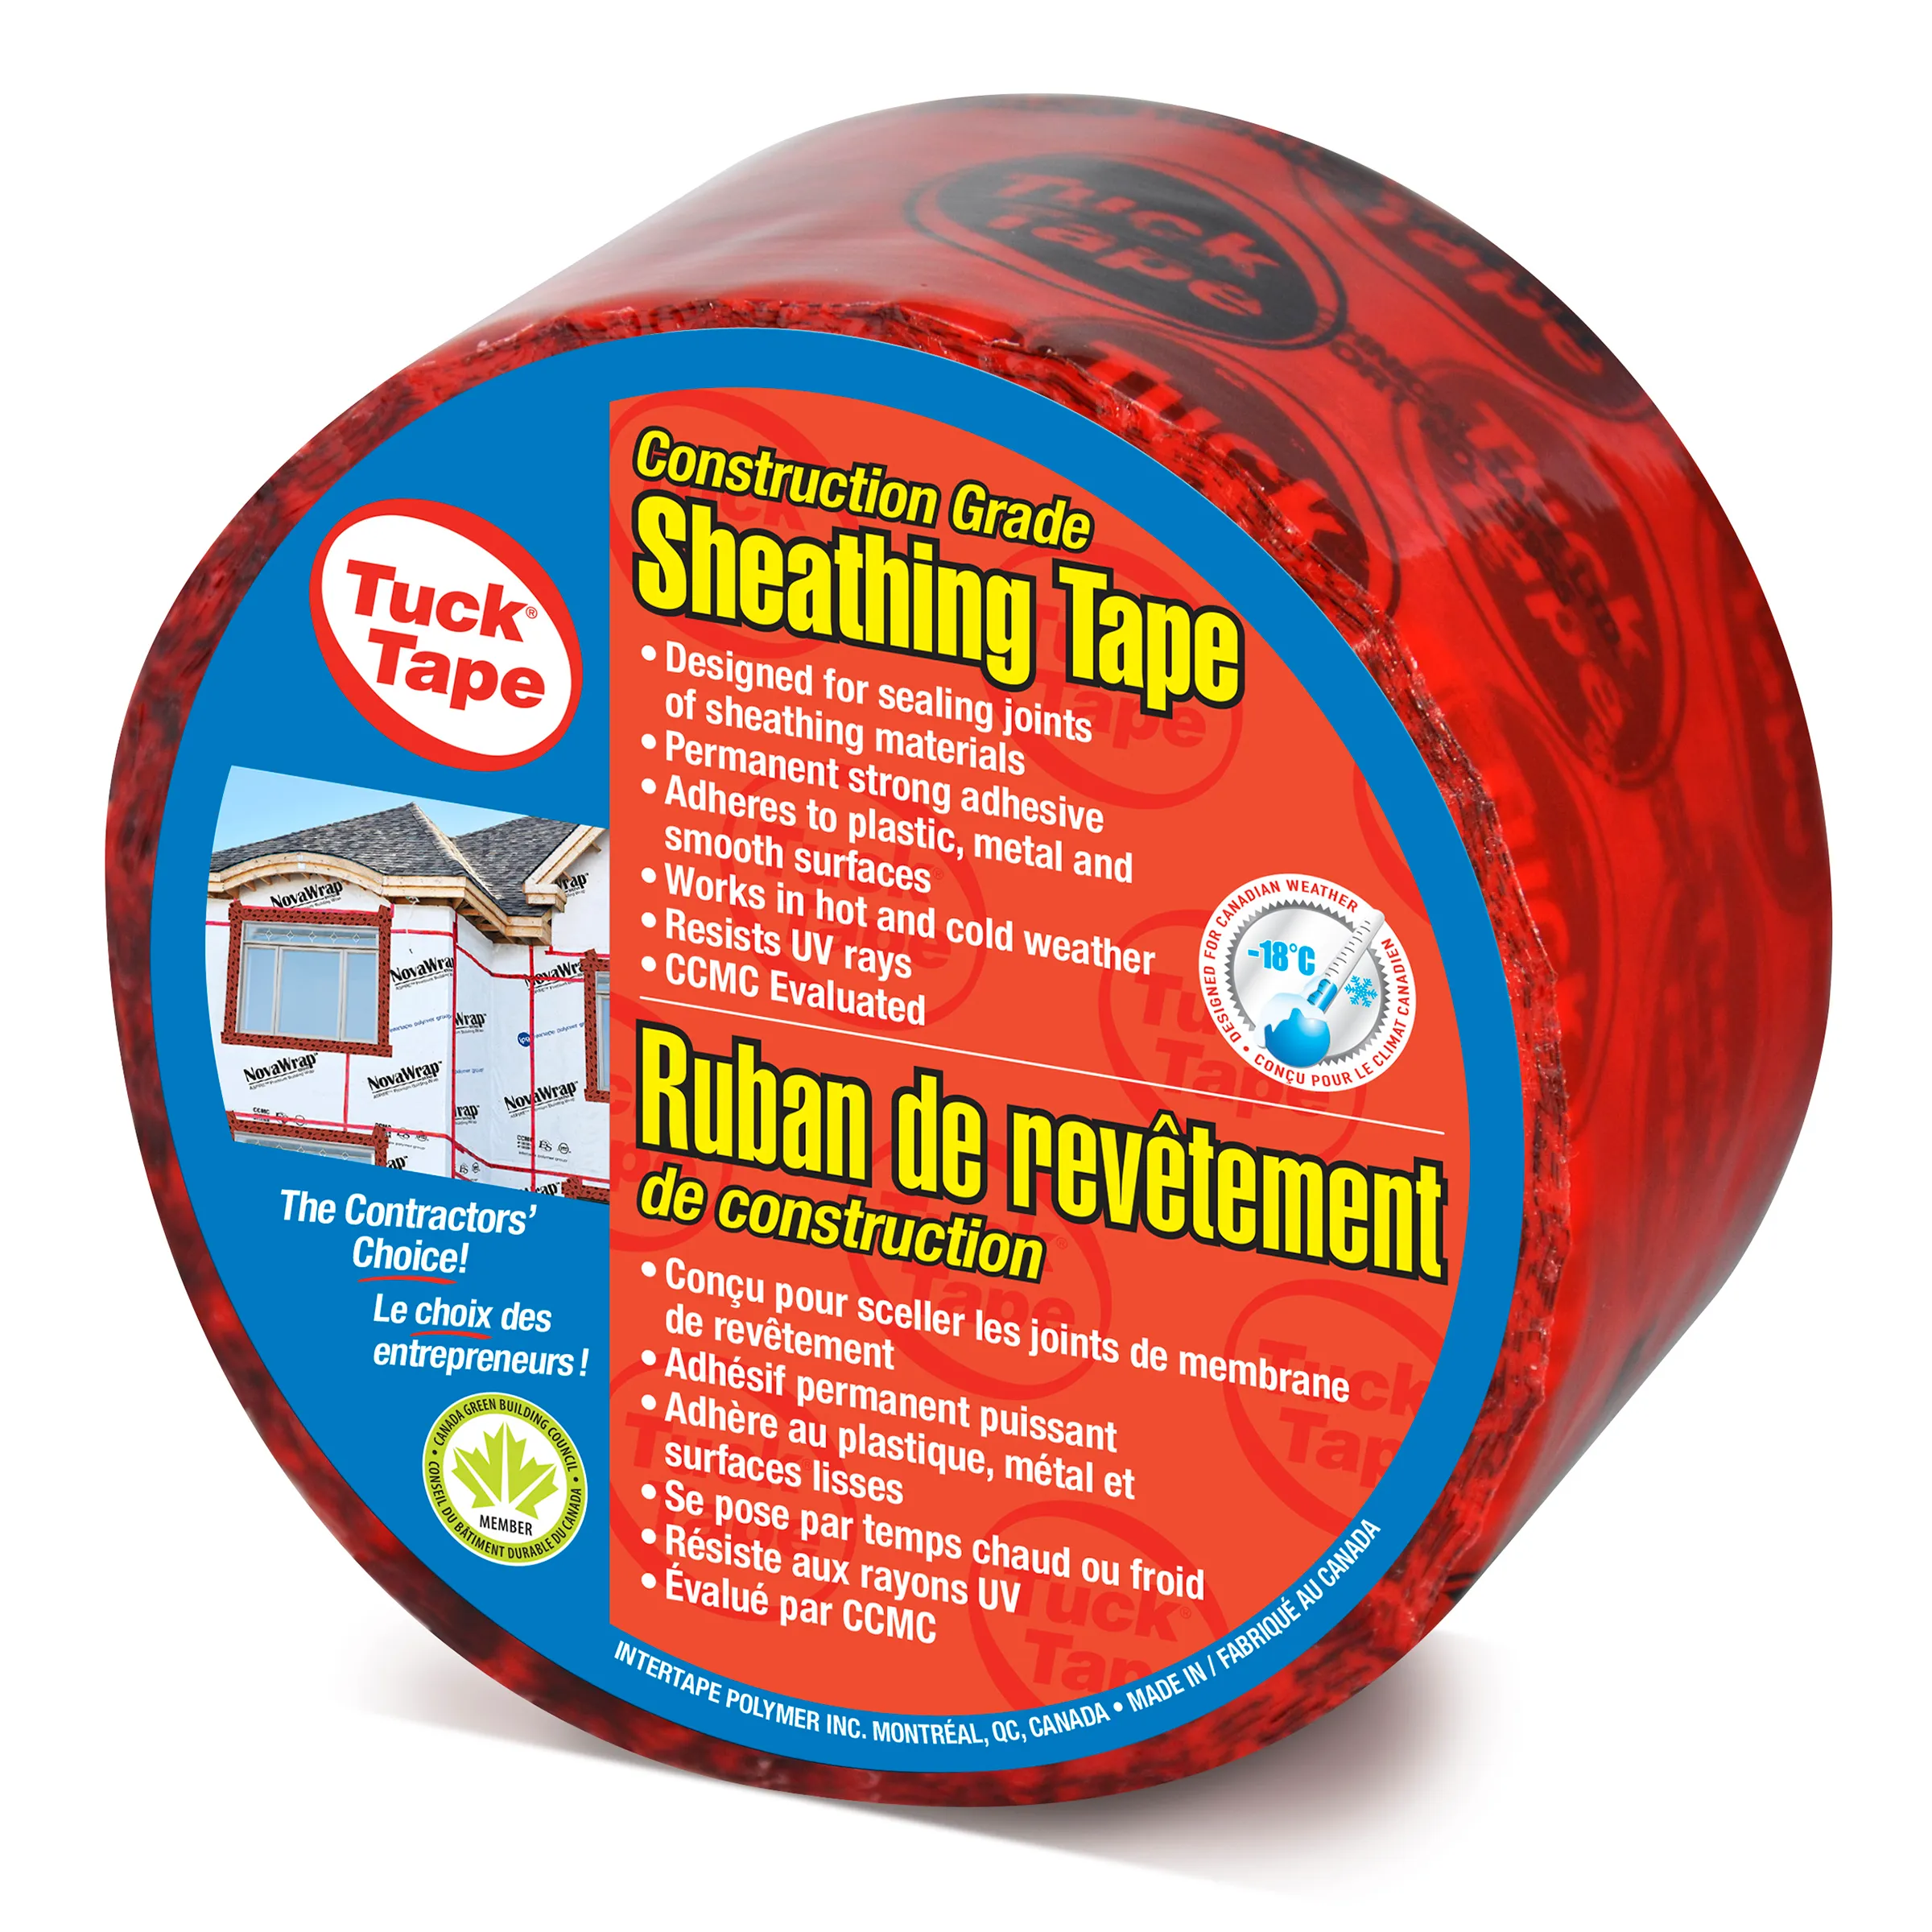 Cantech - Tuck Tape Contractors' Sheathing Tape Red - 20500 - 60mm x 55m